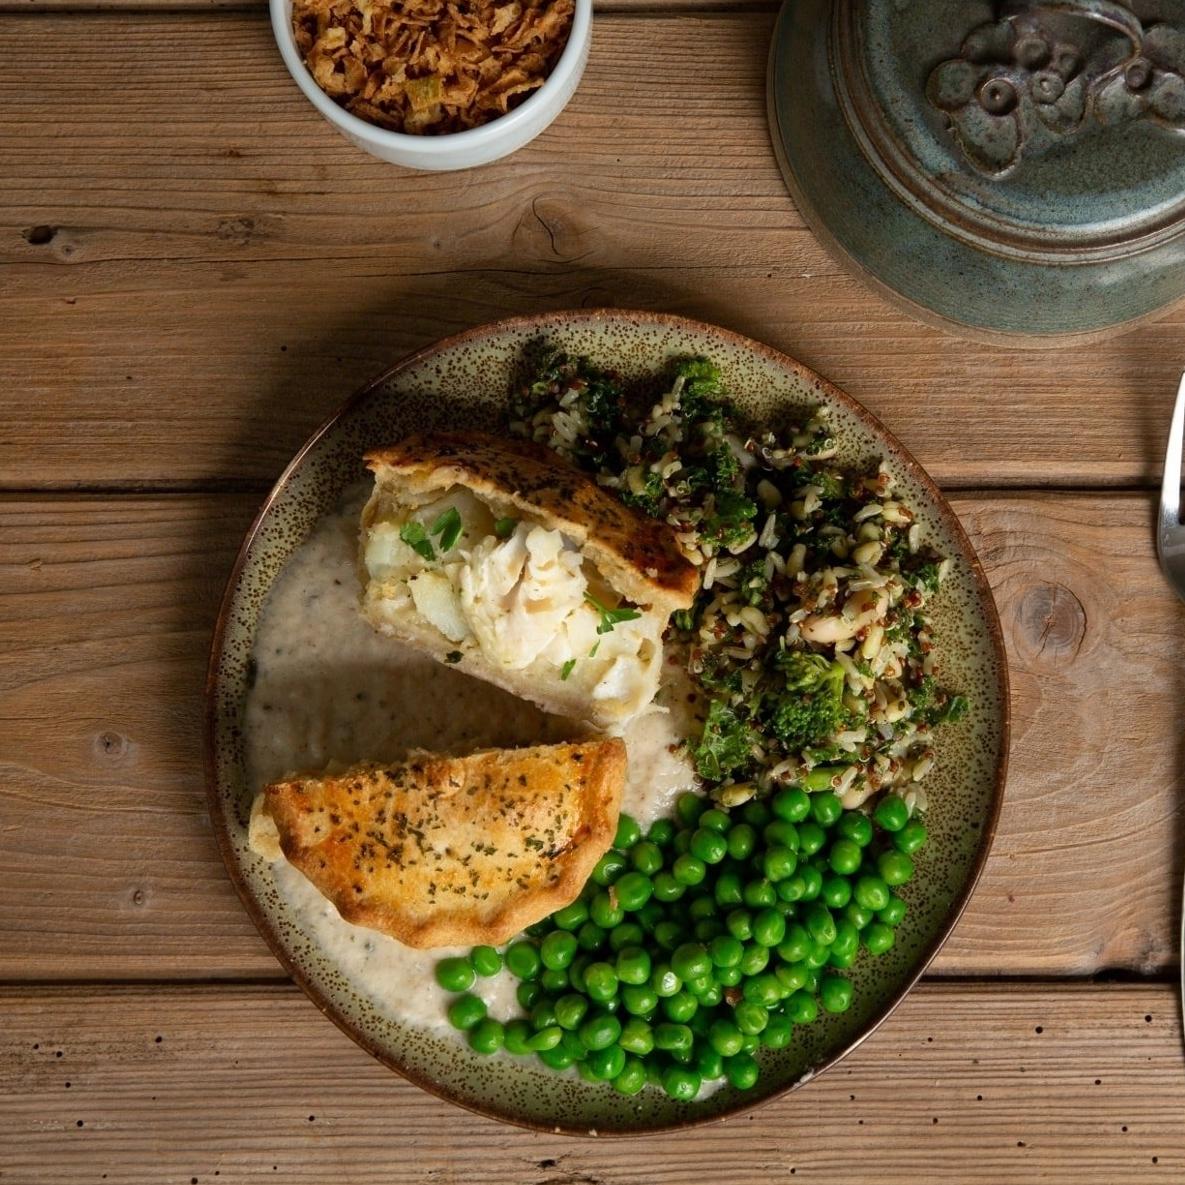 Cullen skink pie cut in half and served with potatoes and peas